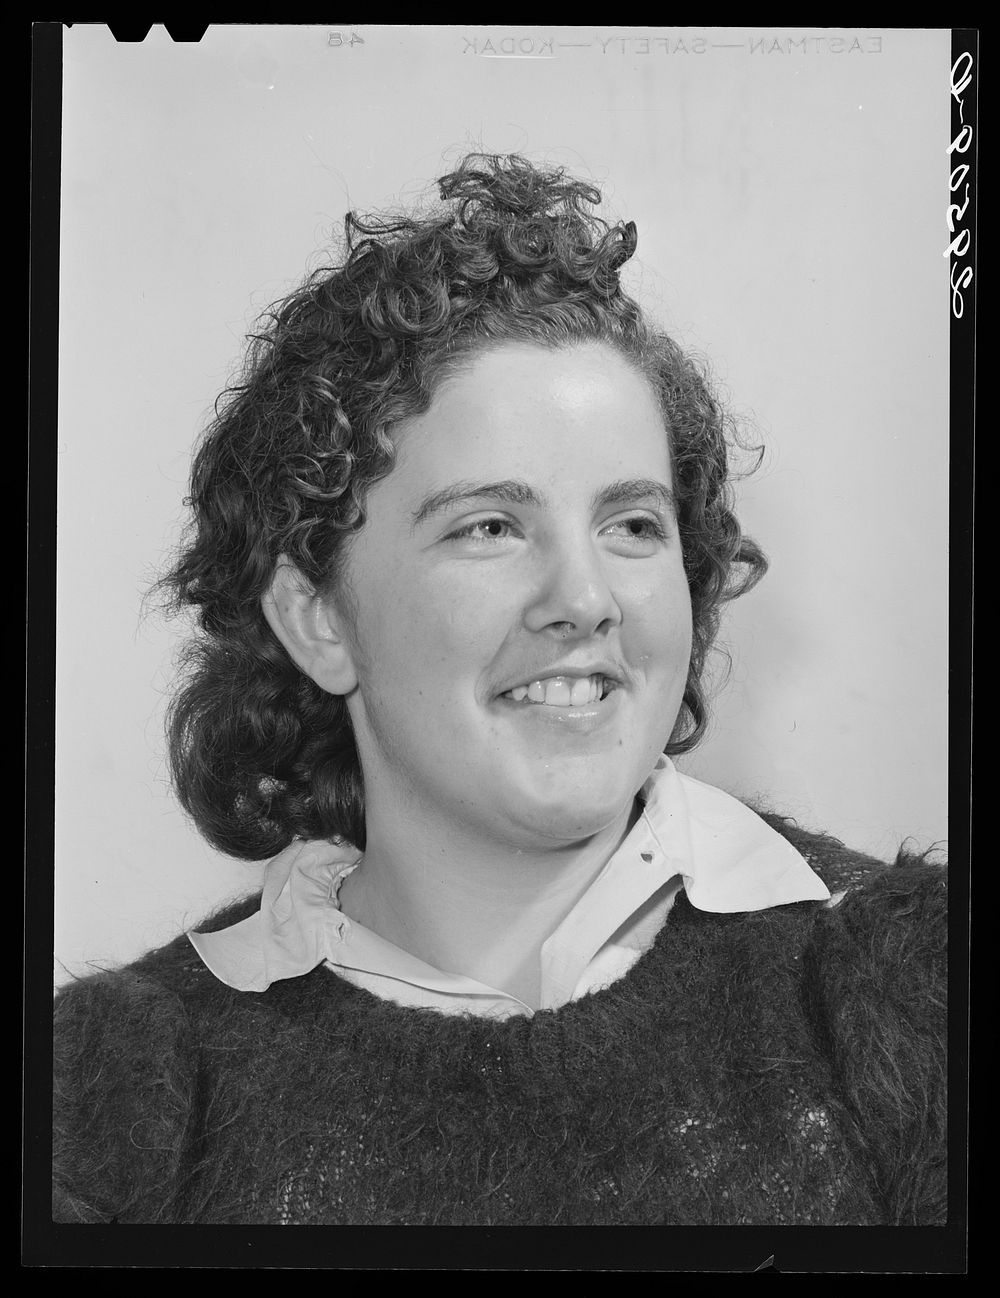 4-H Club girl. Marshalltown, Iowa. Sourced from the Library of Congress.